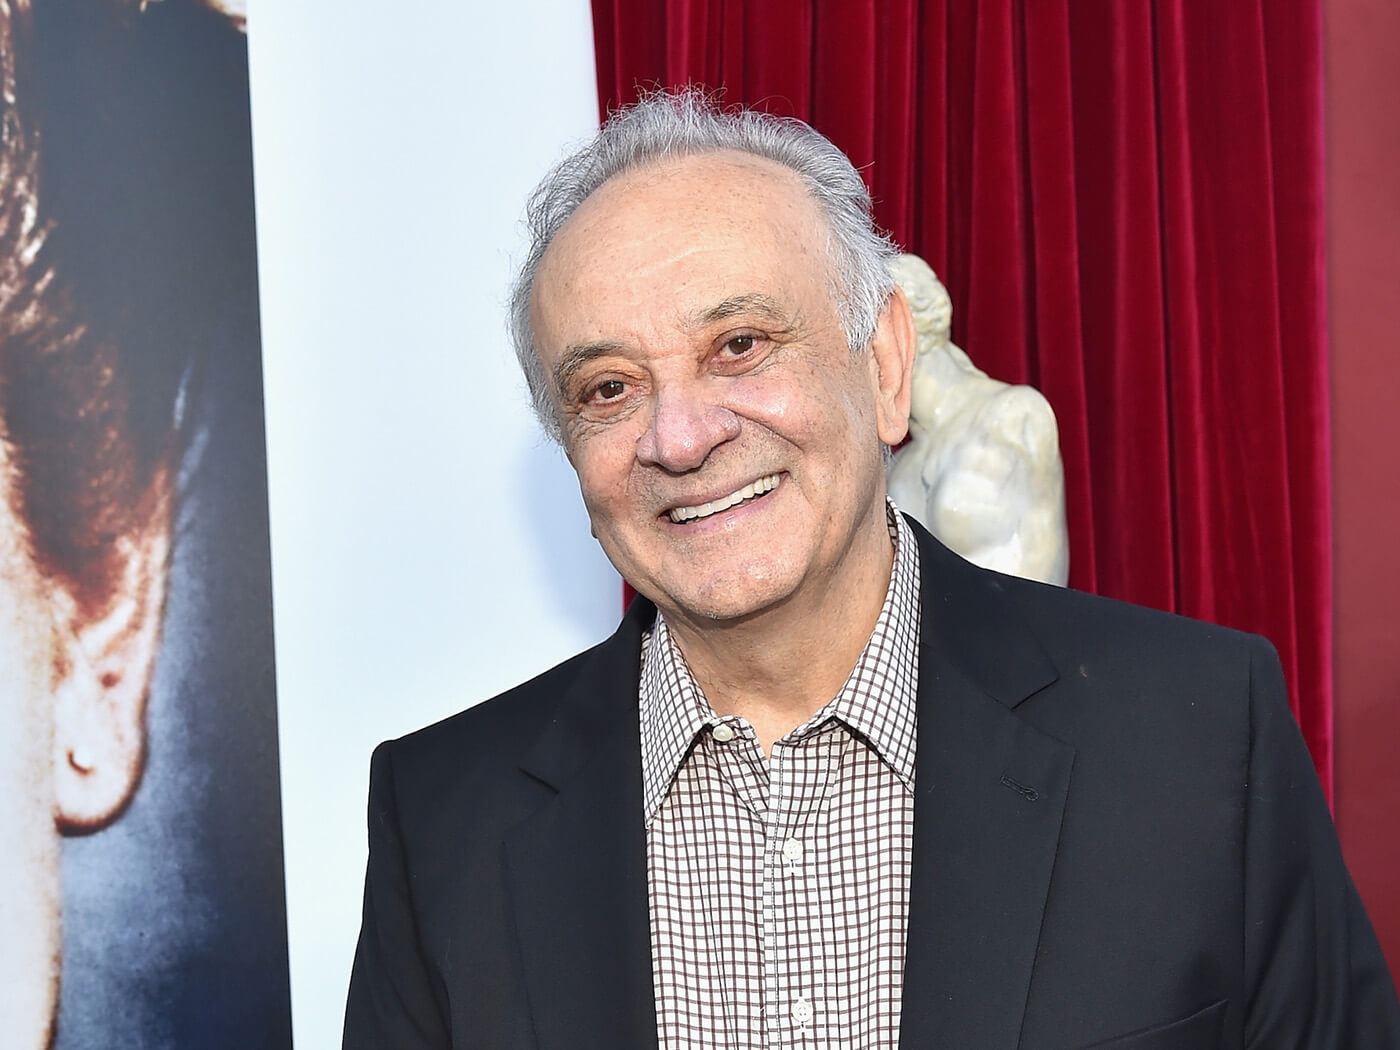 Composer Angelo Badalamenti, who scored Twin Peaks, Blue Velvet and more, dead at 85